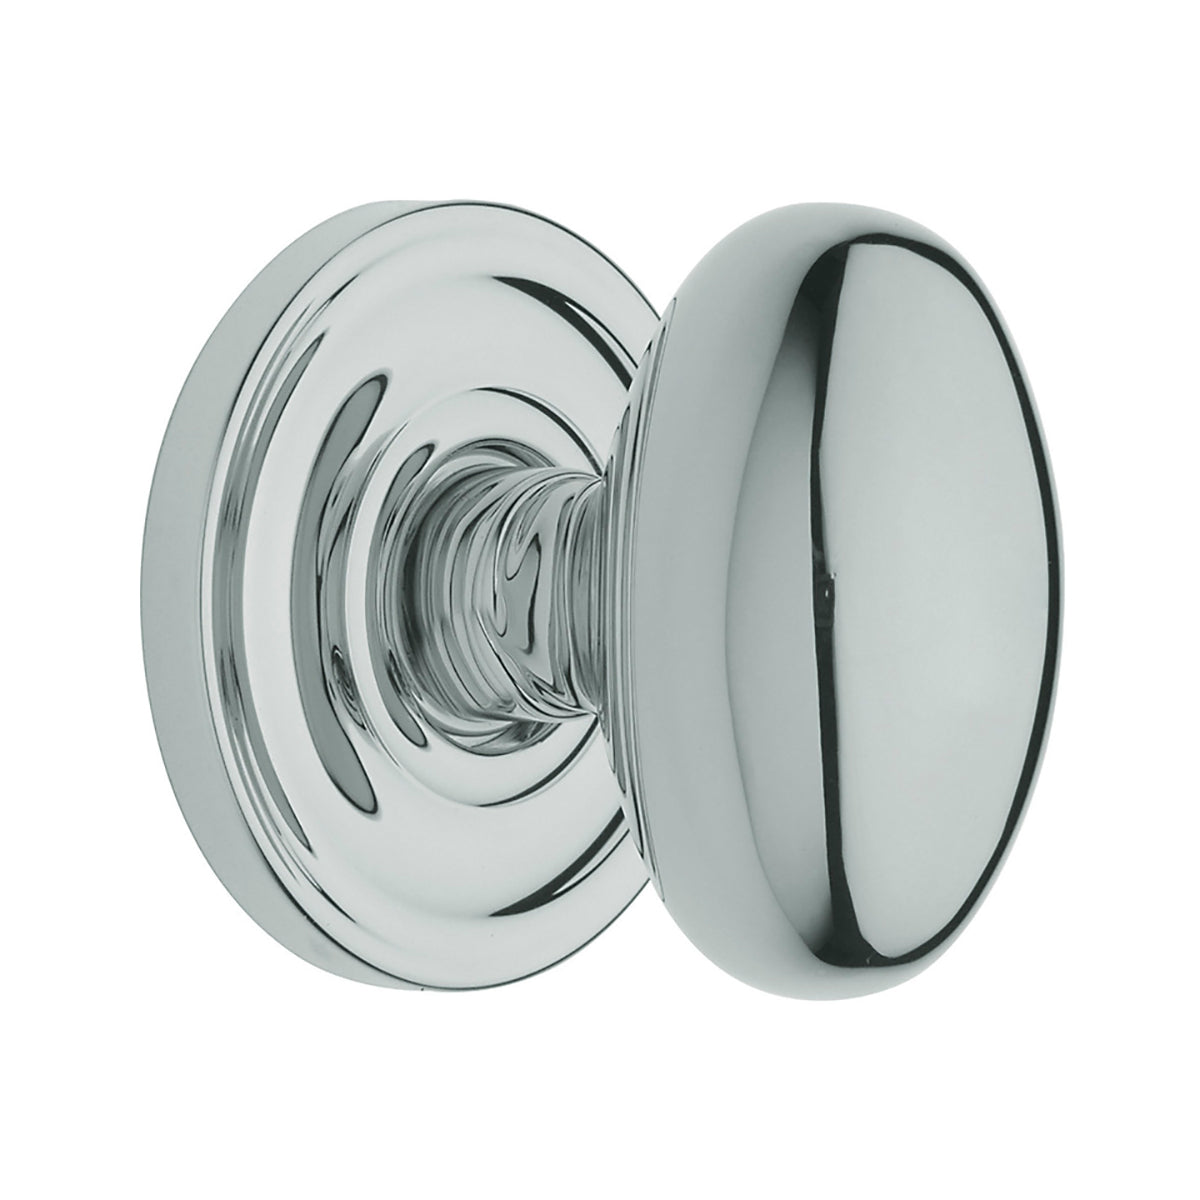 buy dummy knobs locksets at cheap rate in bulk. wholesale & retail hardware repair kit store. home décor ideas, maintenance, repair replacement parts